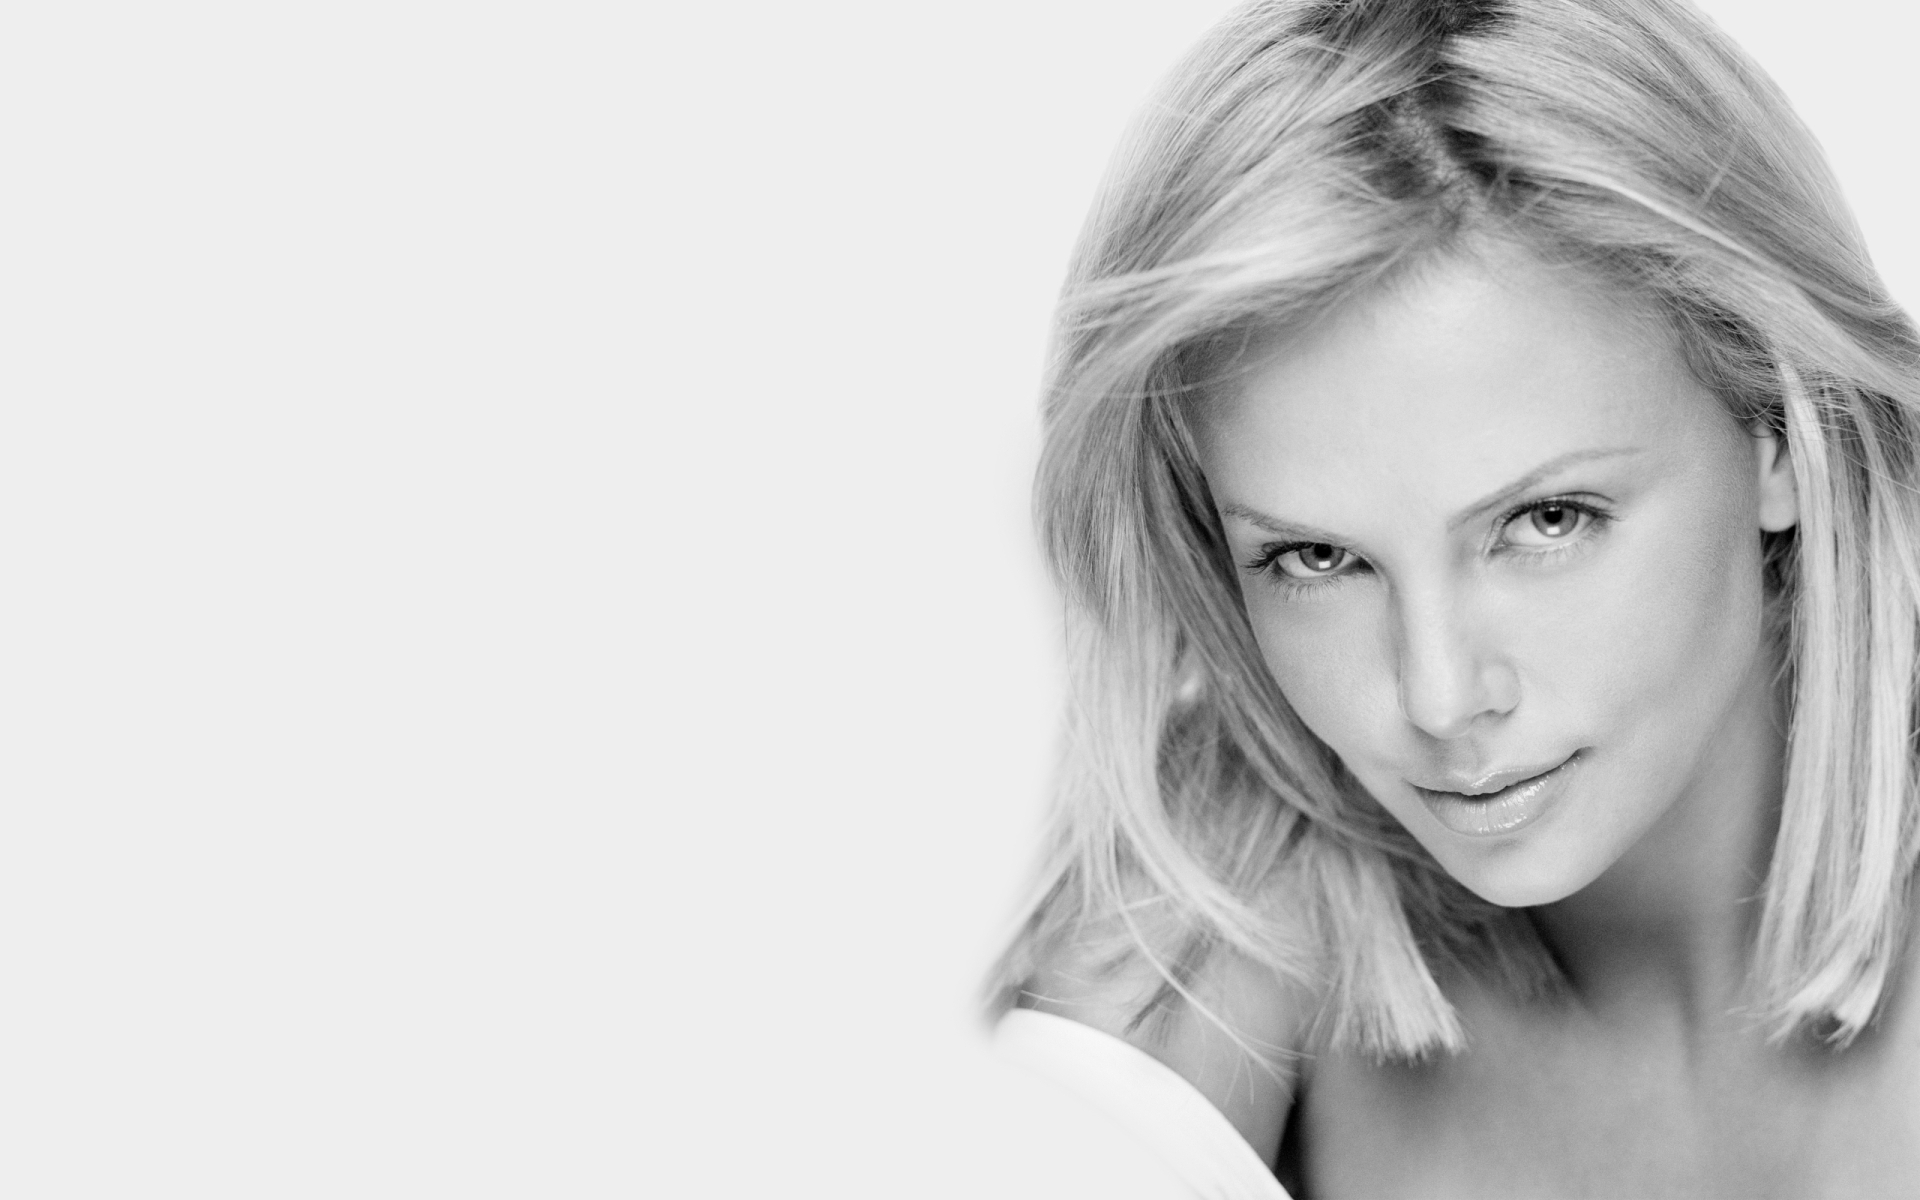 Charlize Theron Computer Wallpapers, Desktop Backgrounds ...